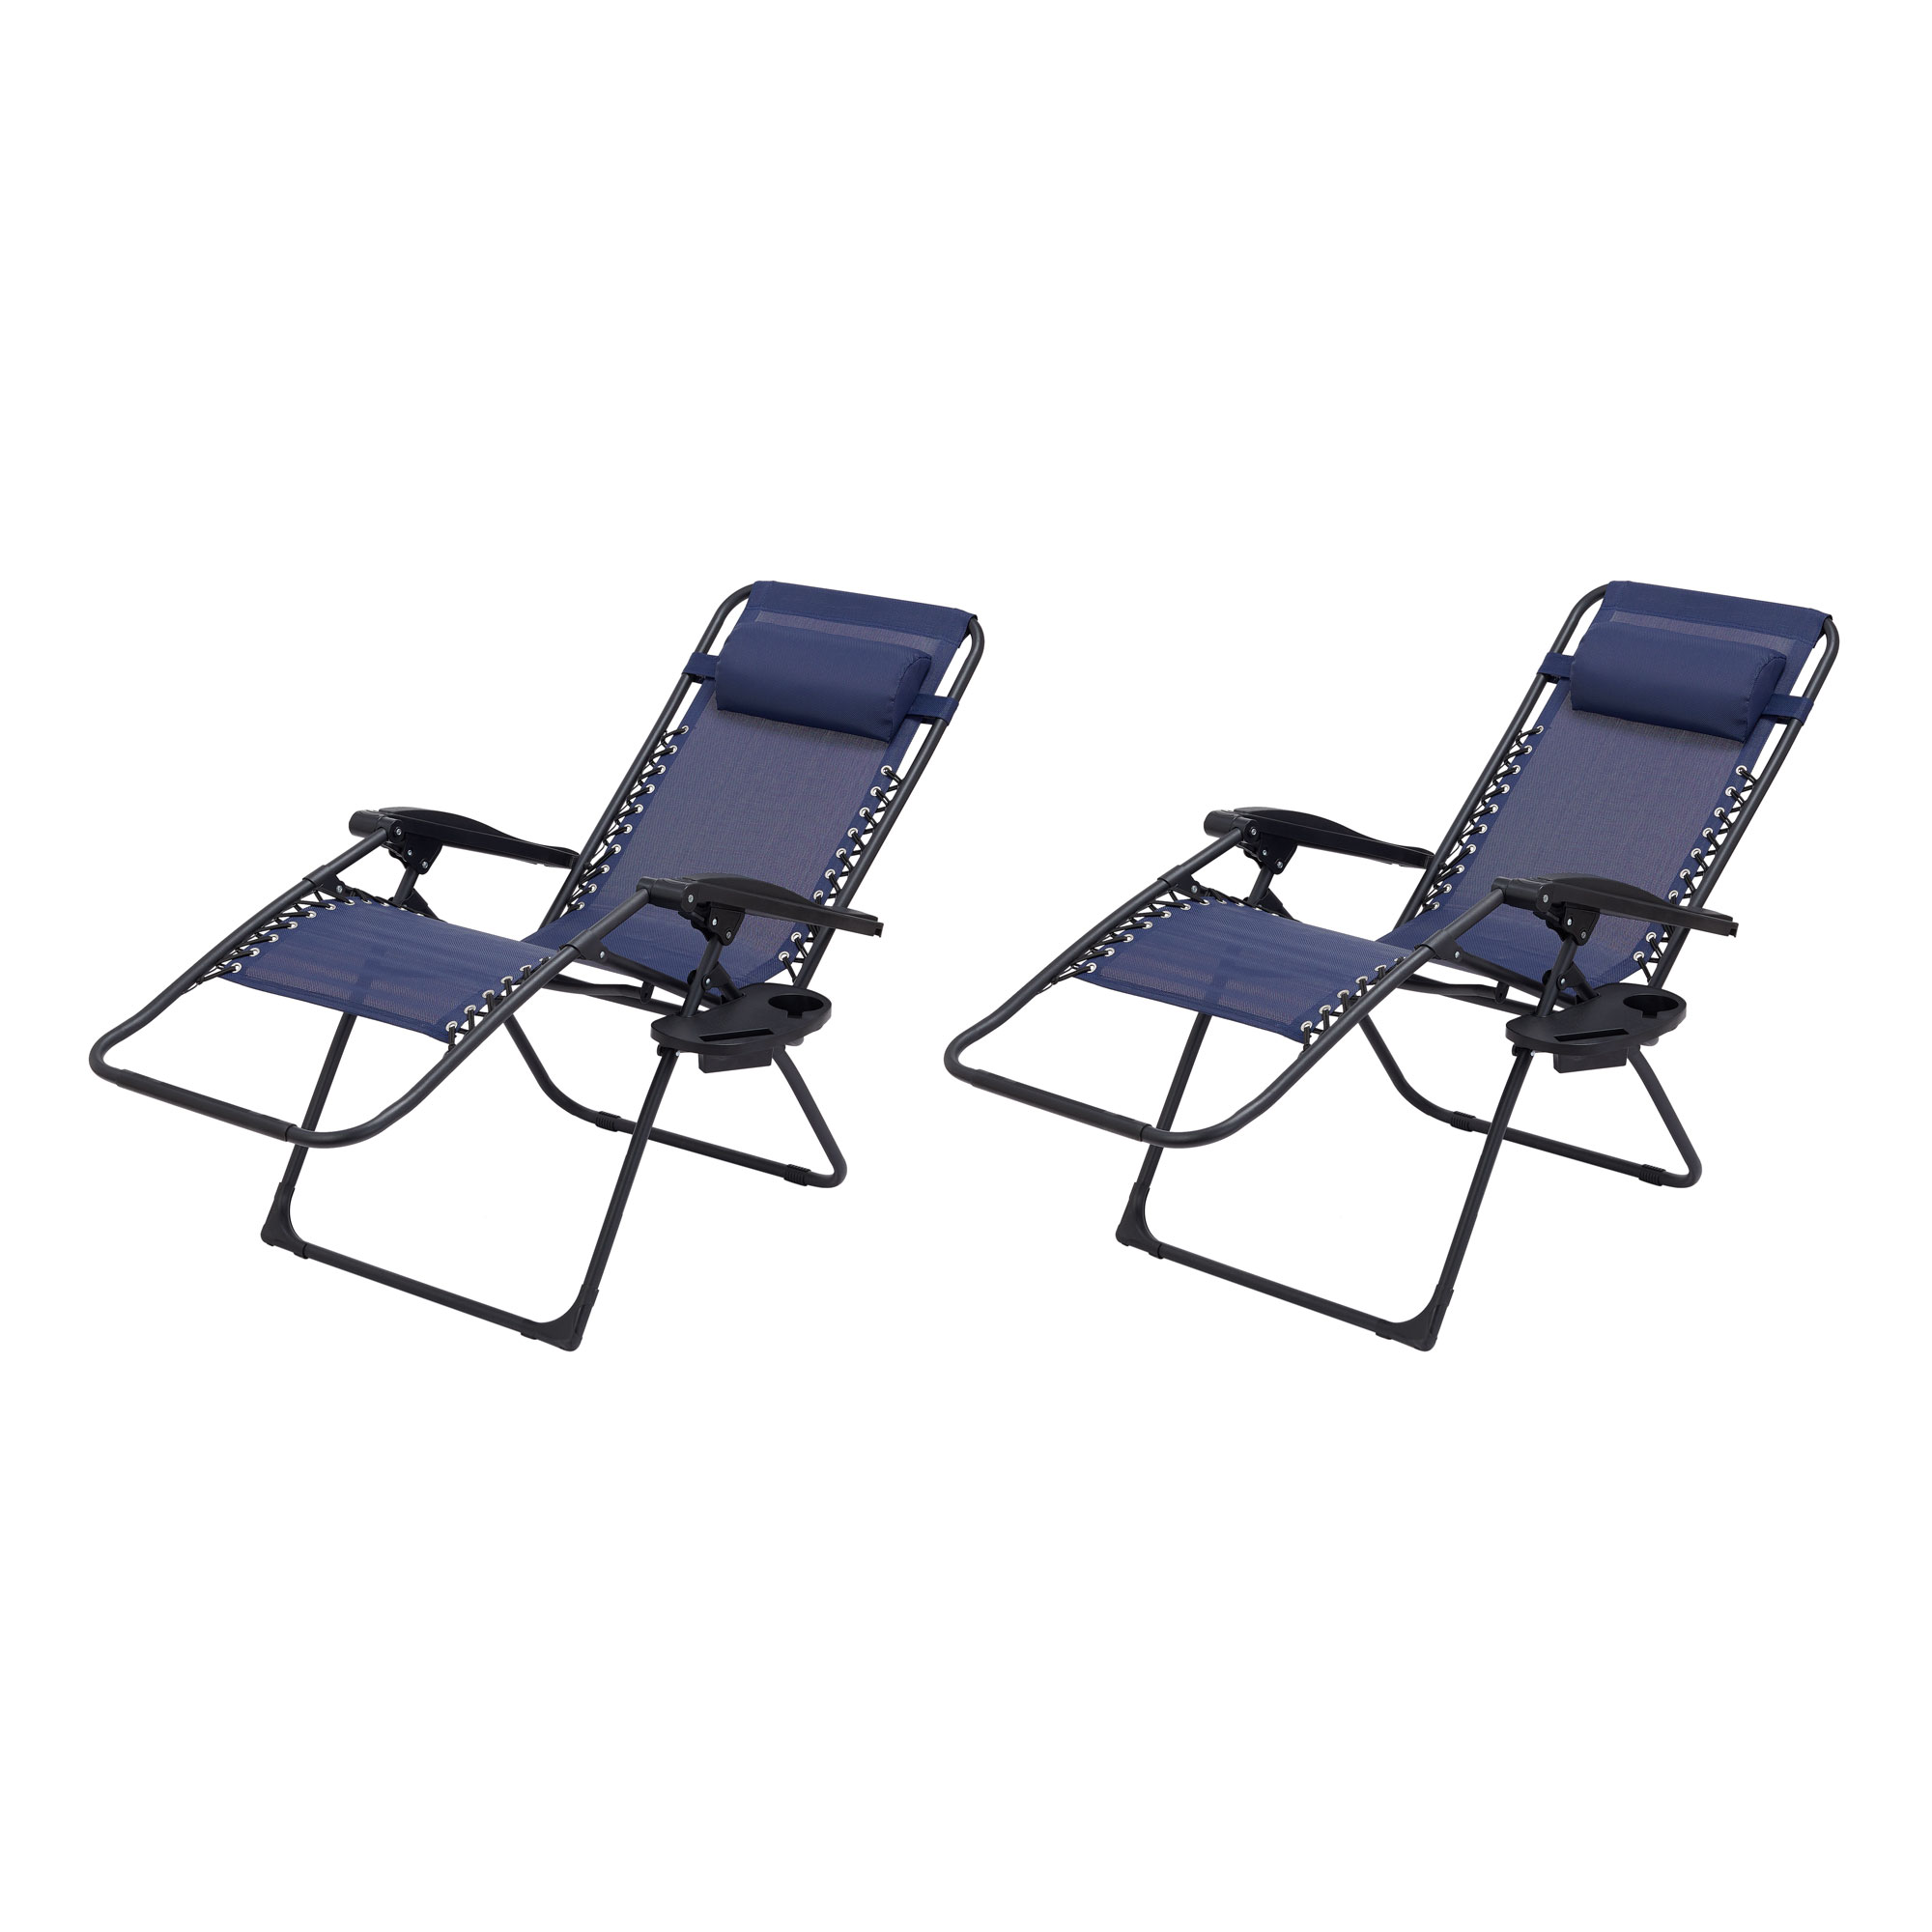 Mainstays Reclining Zero-Gravity Lounge Chair with Pillow and Cup Holder - Set of 2, Navy/Black - image 5 of 6